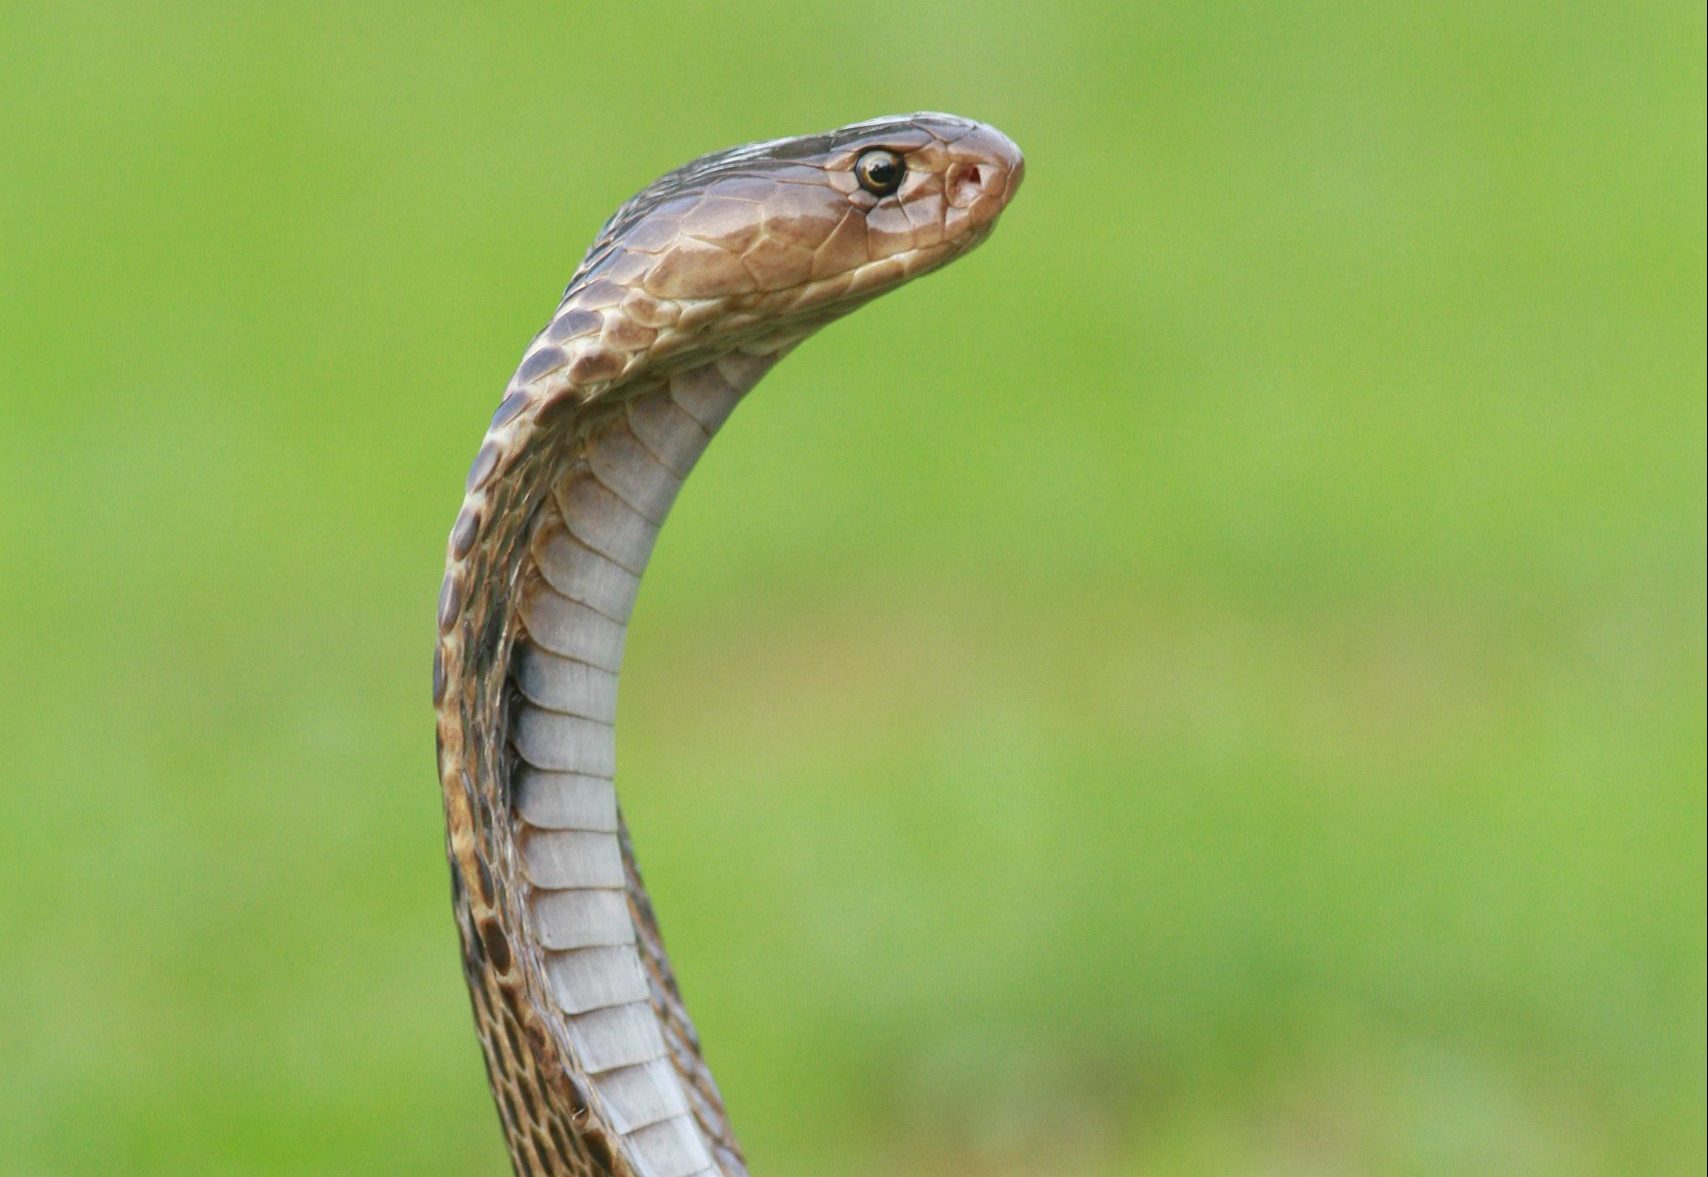 Zebra Cobra Owner Is Being Charged For A Snake Escape